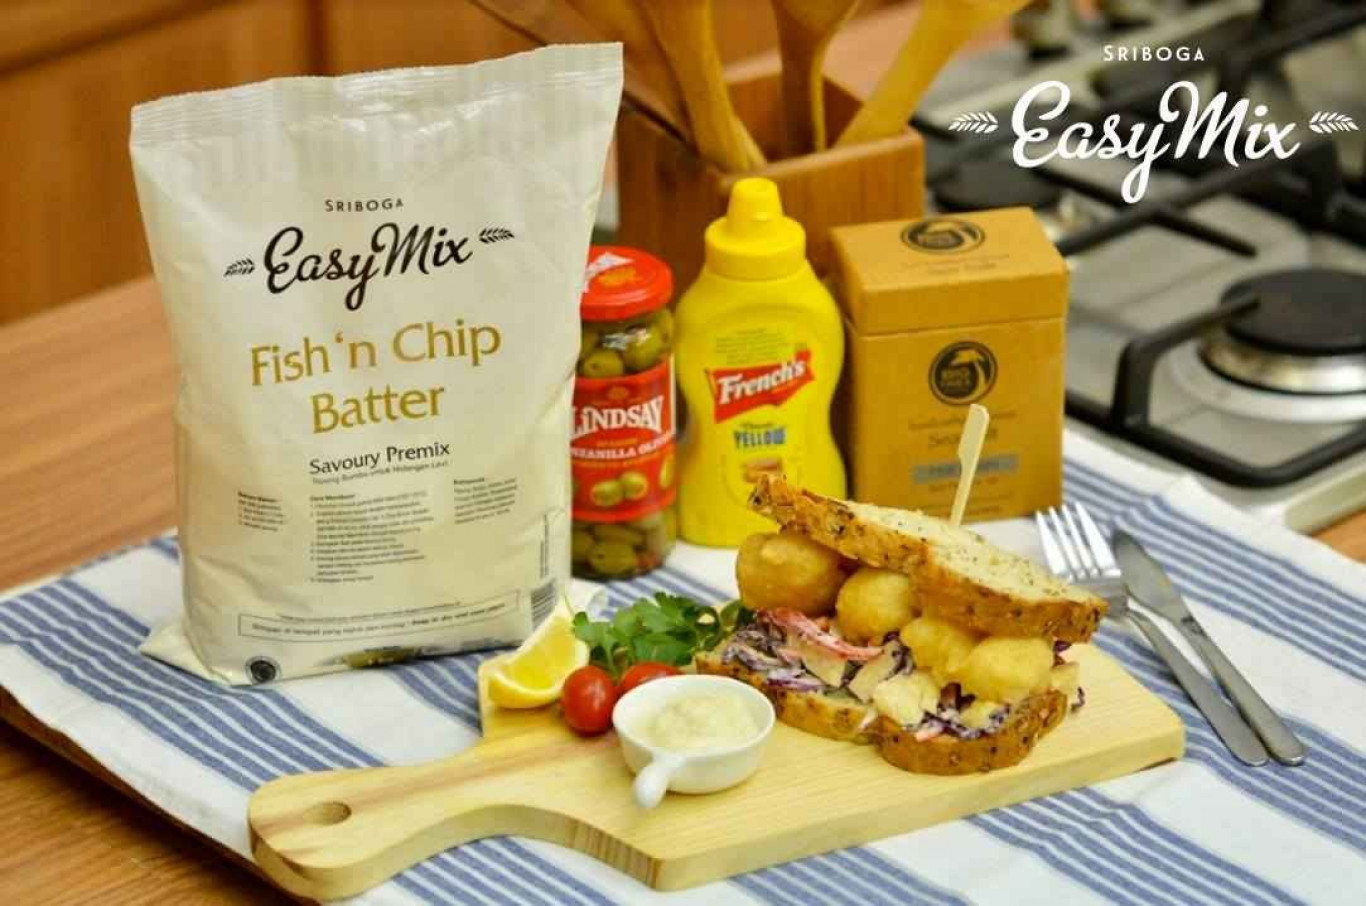 A fish and chip sandwich made with Sriboga Easymix Fish ‘n Chip Batter